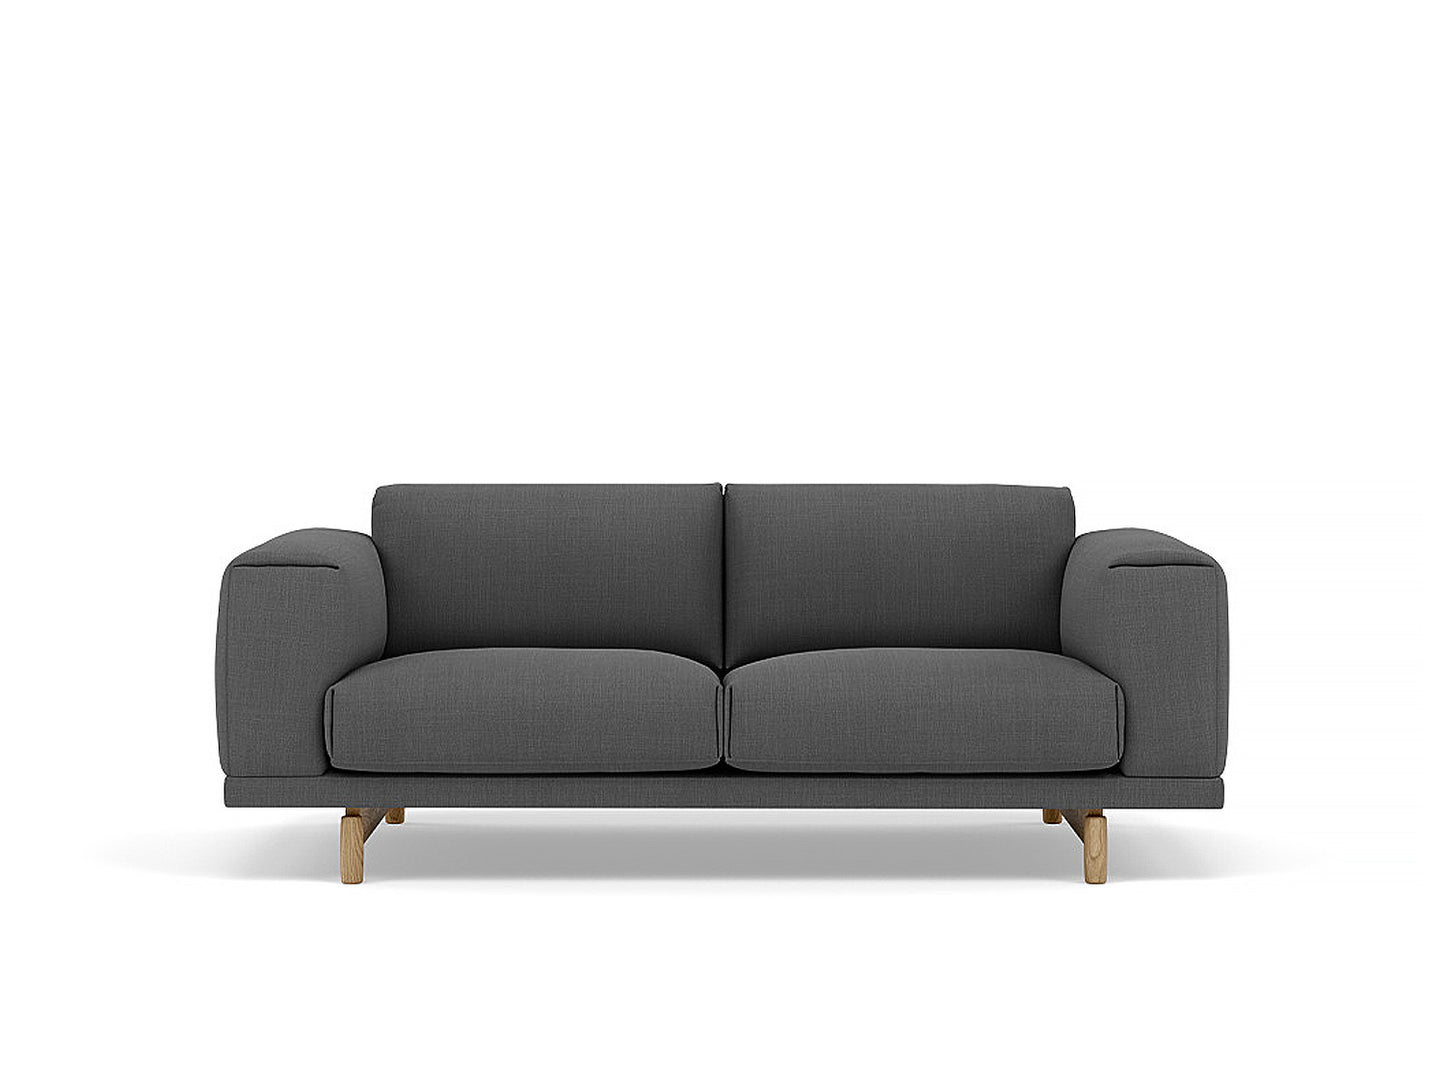 Rest Sofa by Muuto - 2 Seater / Remix 163